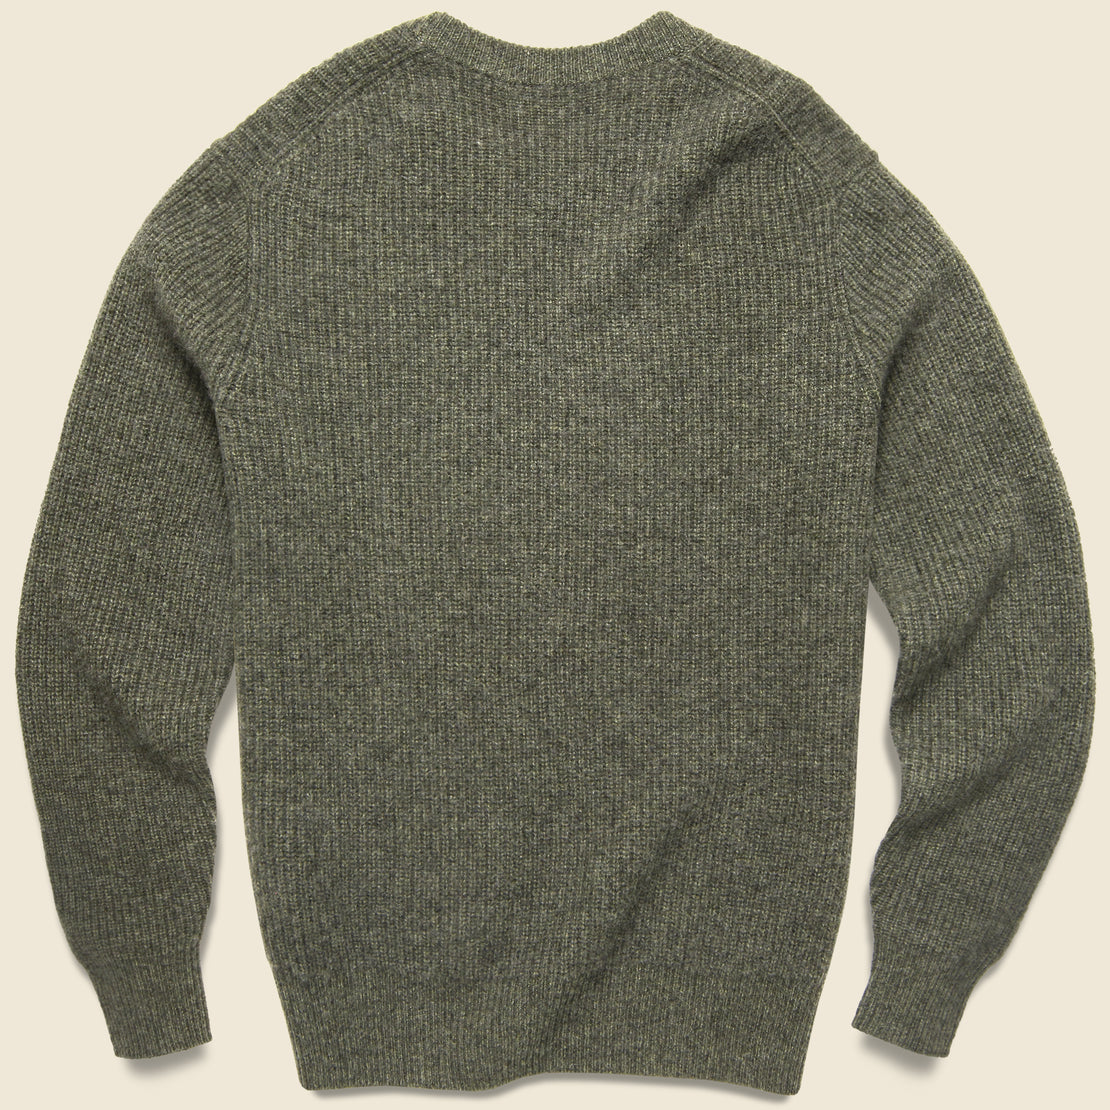 Cashmere Jordan Sweater - Heather Olive - Alex Mill - STAG Provisions - Tops - Sweater